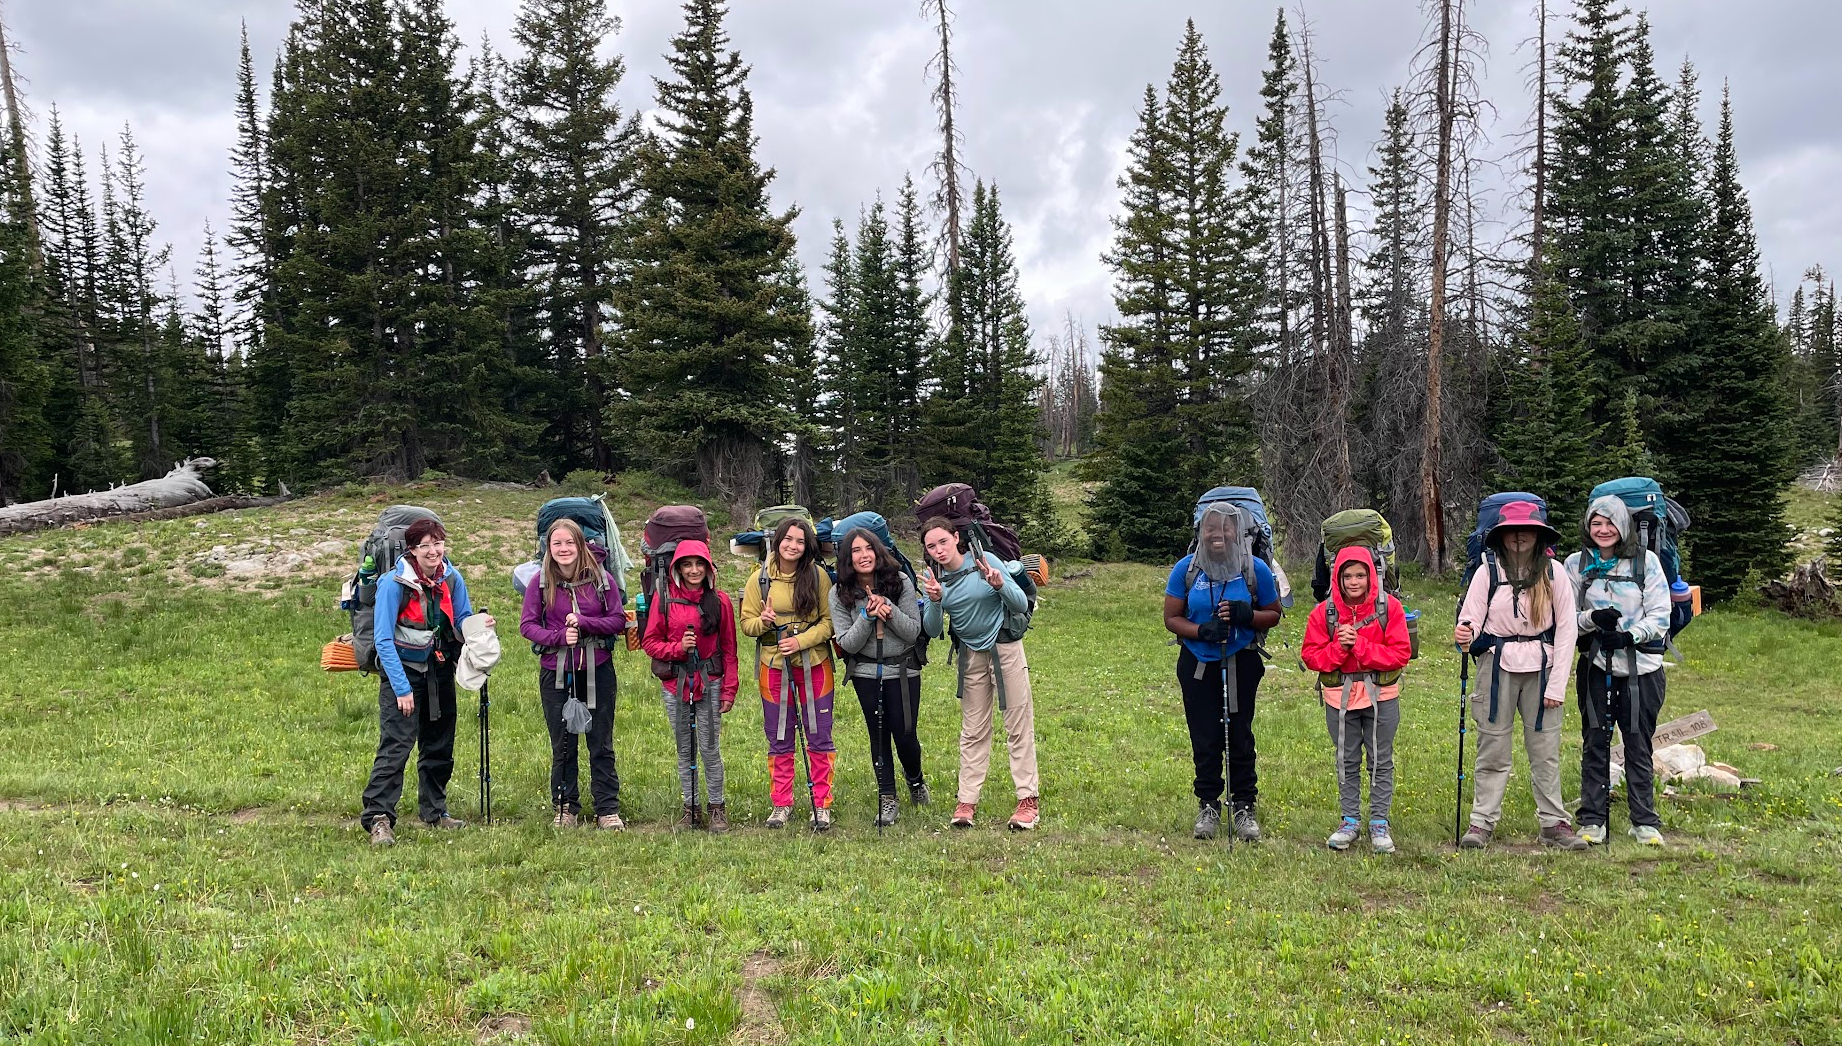 Middle school youth summer backpacking and climbing overnight trip. 